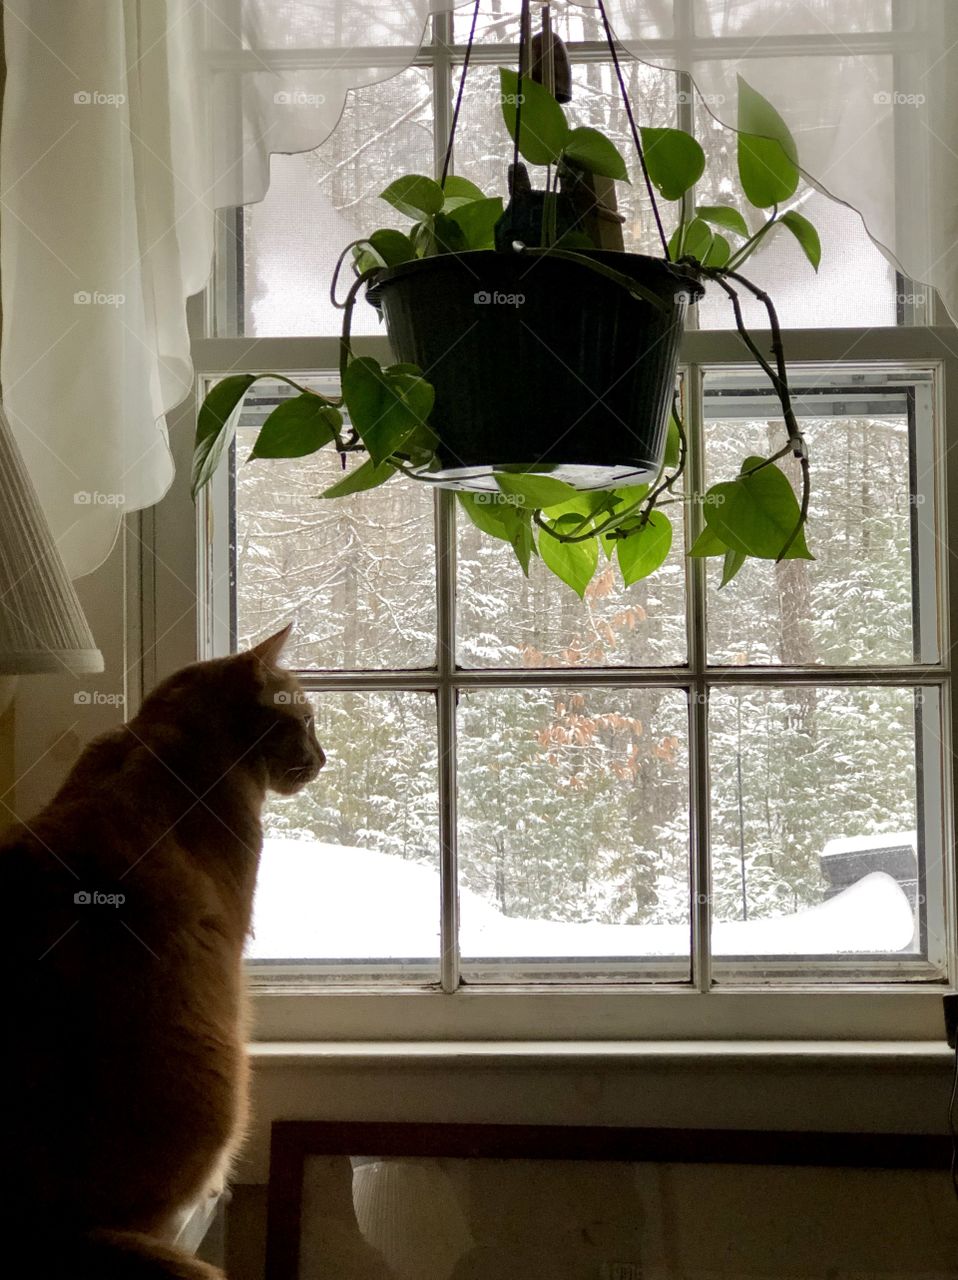 Relaxing and staying warm in the house with the cat as we watch the snow fall in the backyard through a glass window